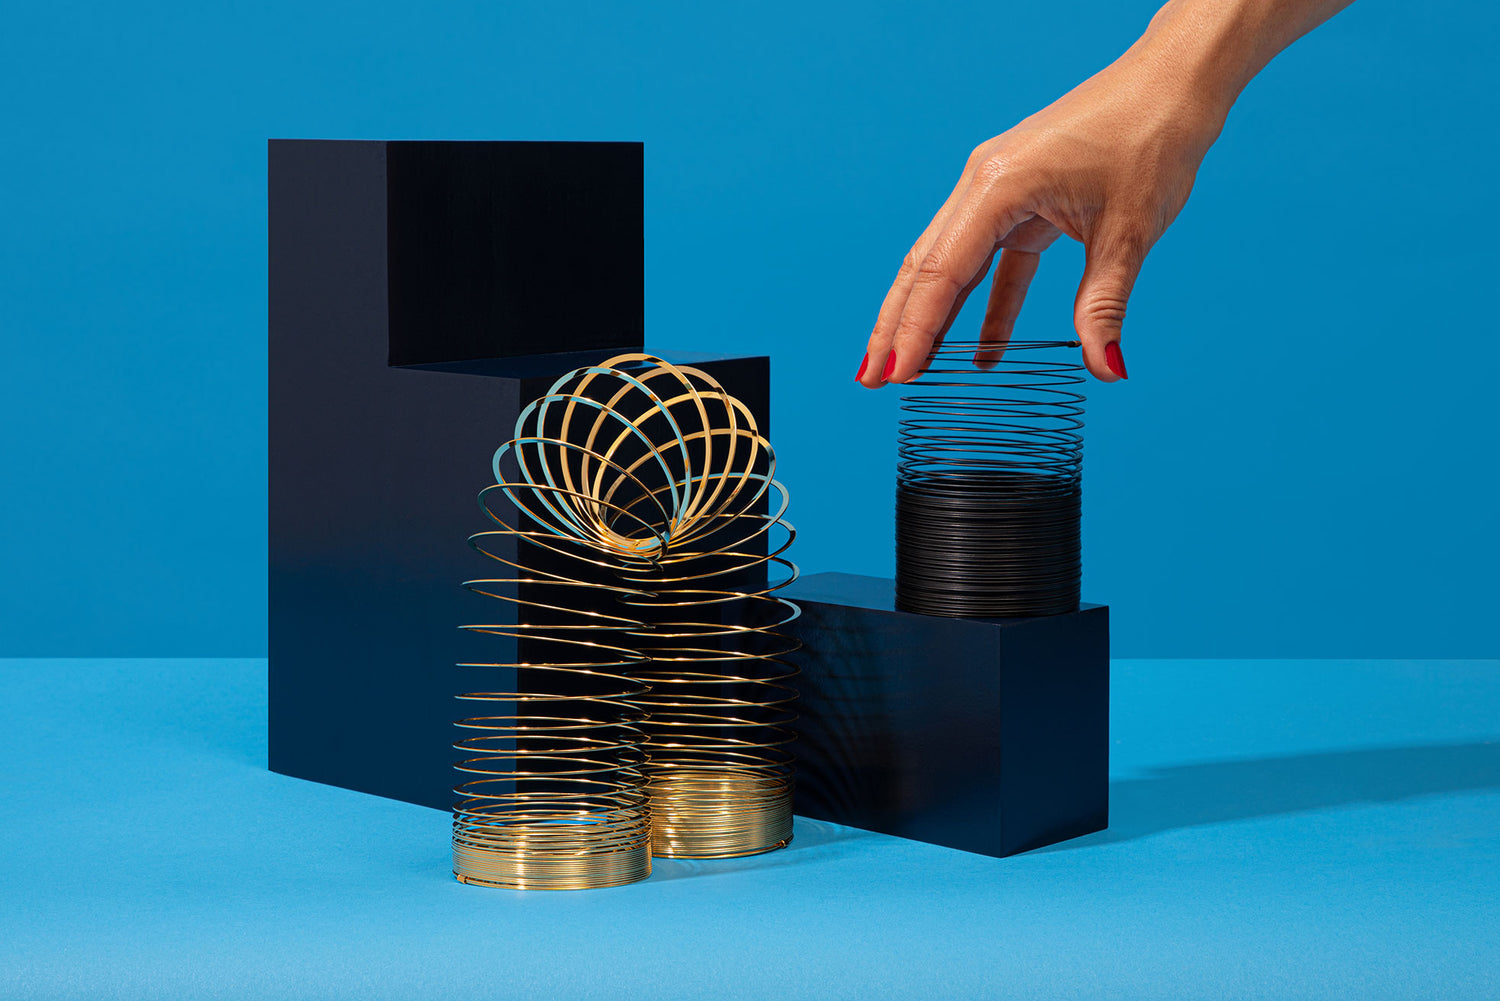 Slinky - History's Best Toys: All-TIME 100 Greatest Toys - TIME